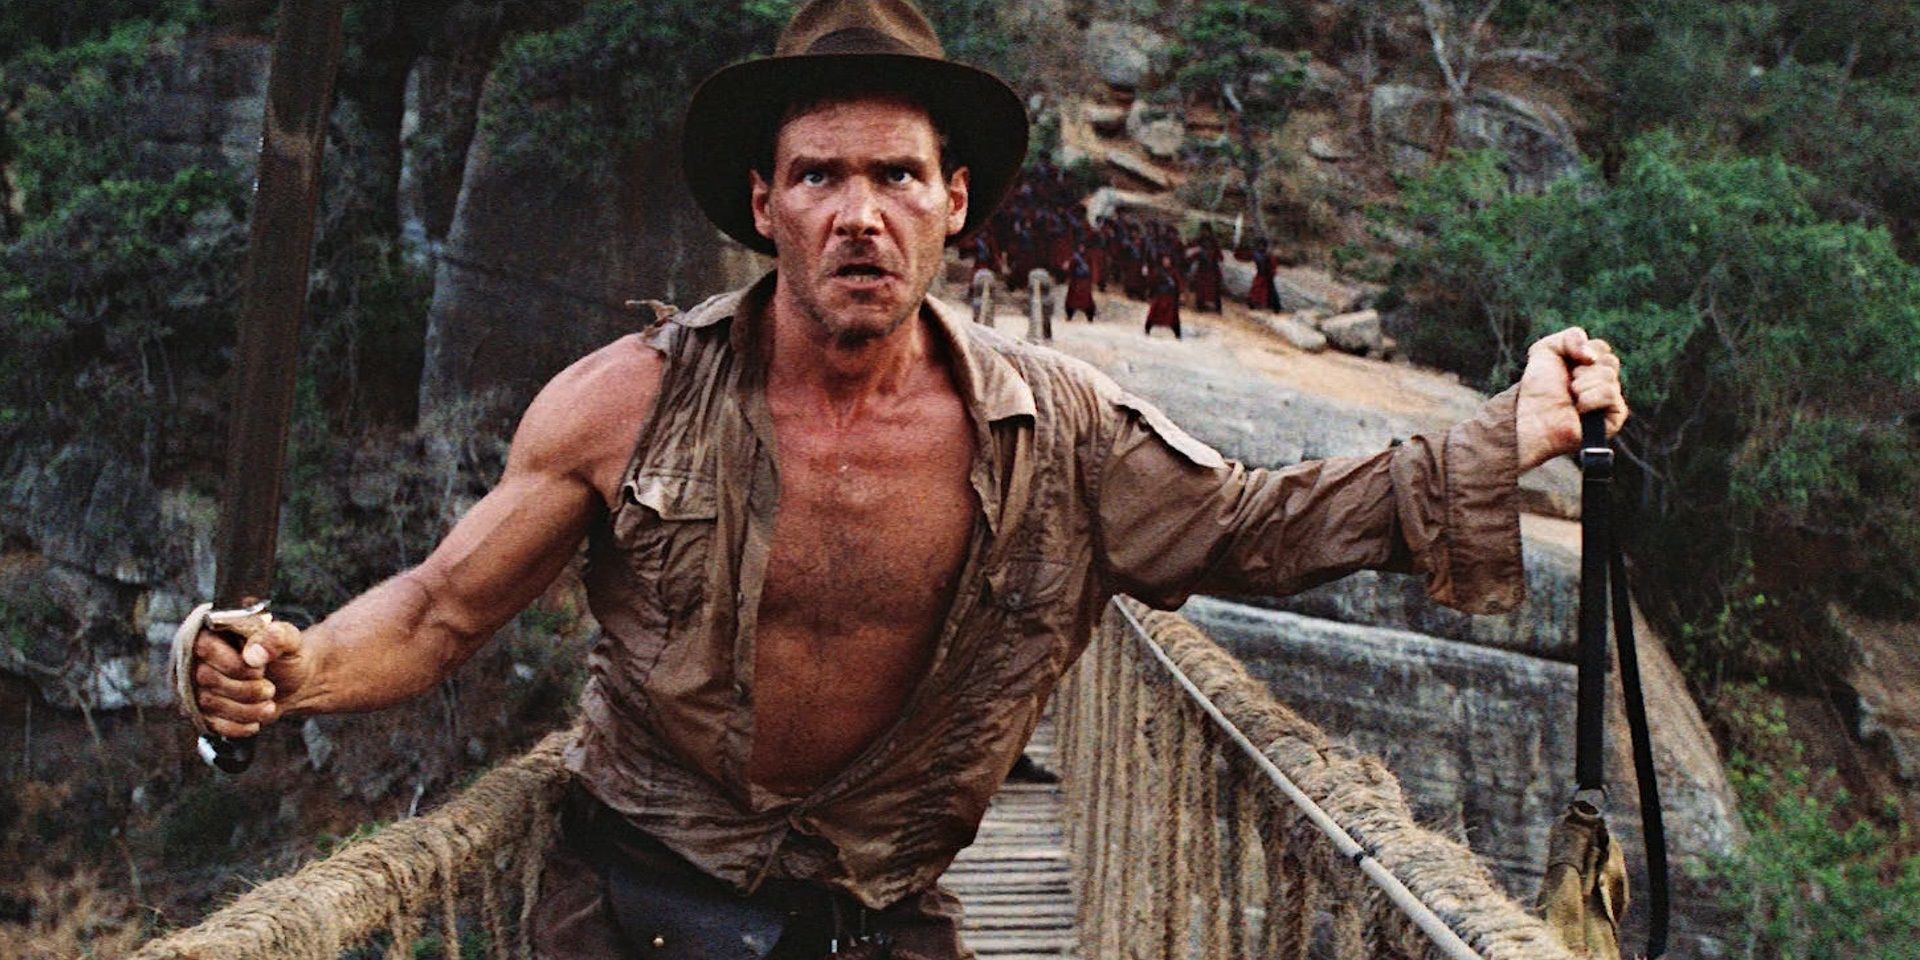 Indiana Jones holds a bag and a sword in Indiana Jones and the Temple of Doom